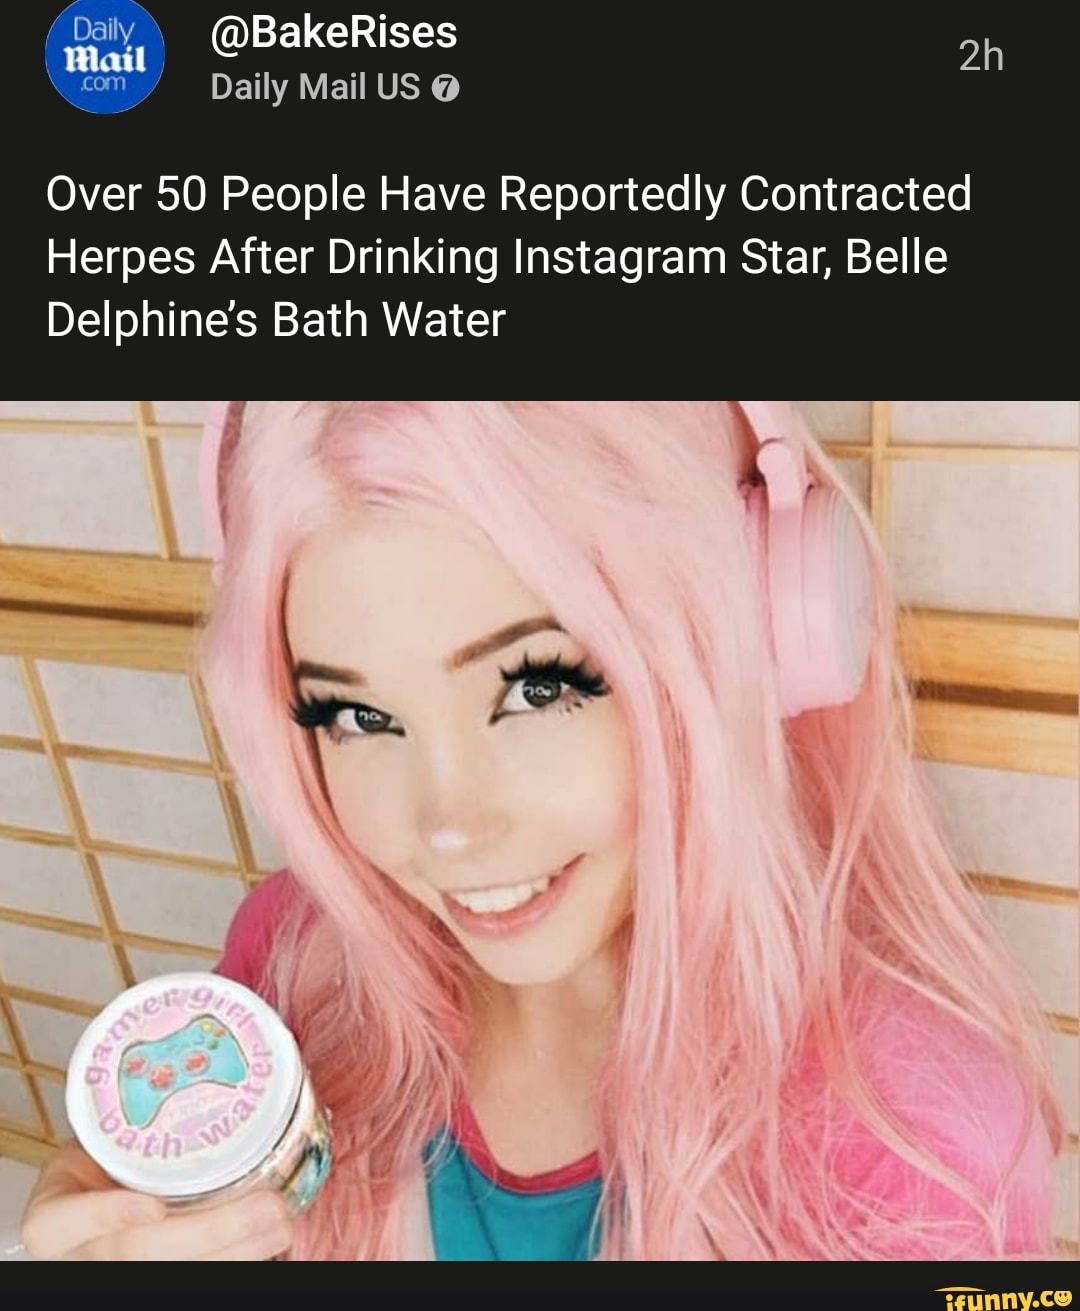 No, Fans Who Drank Instagram Star's Bathwater Did NOT Get Herpes